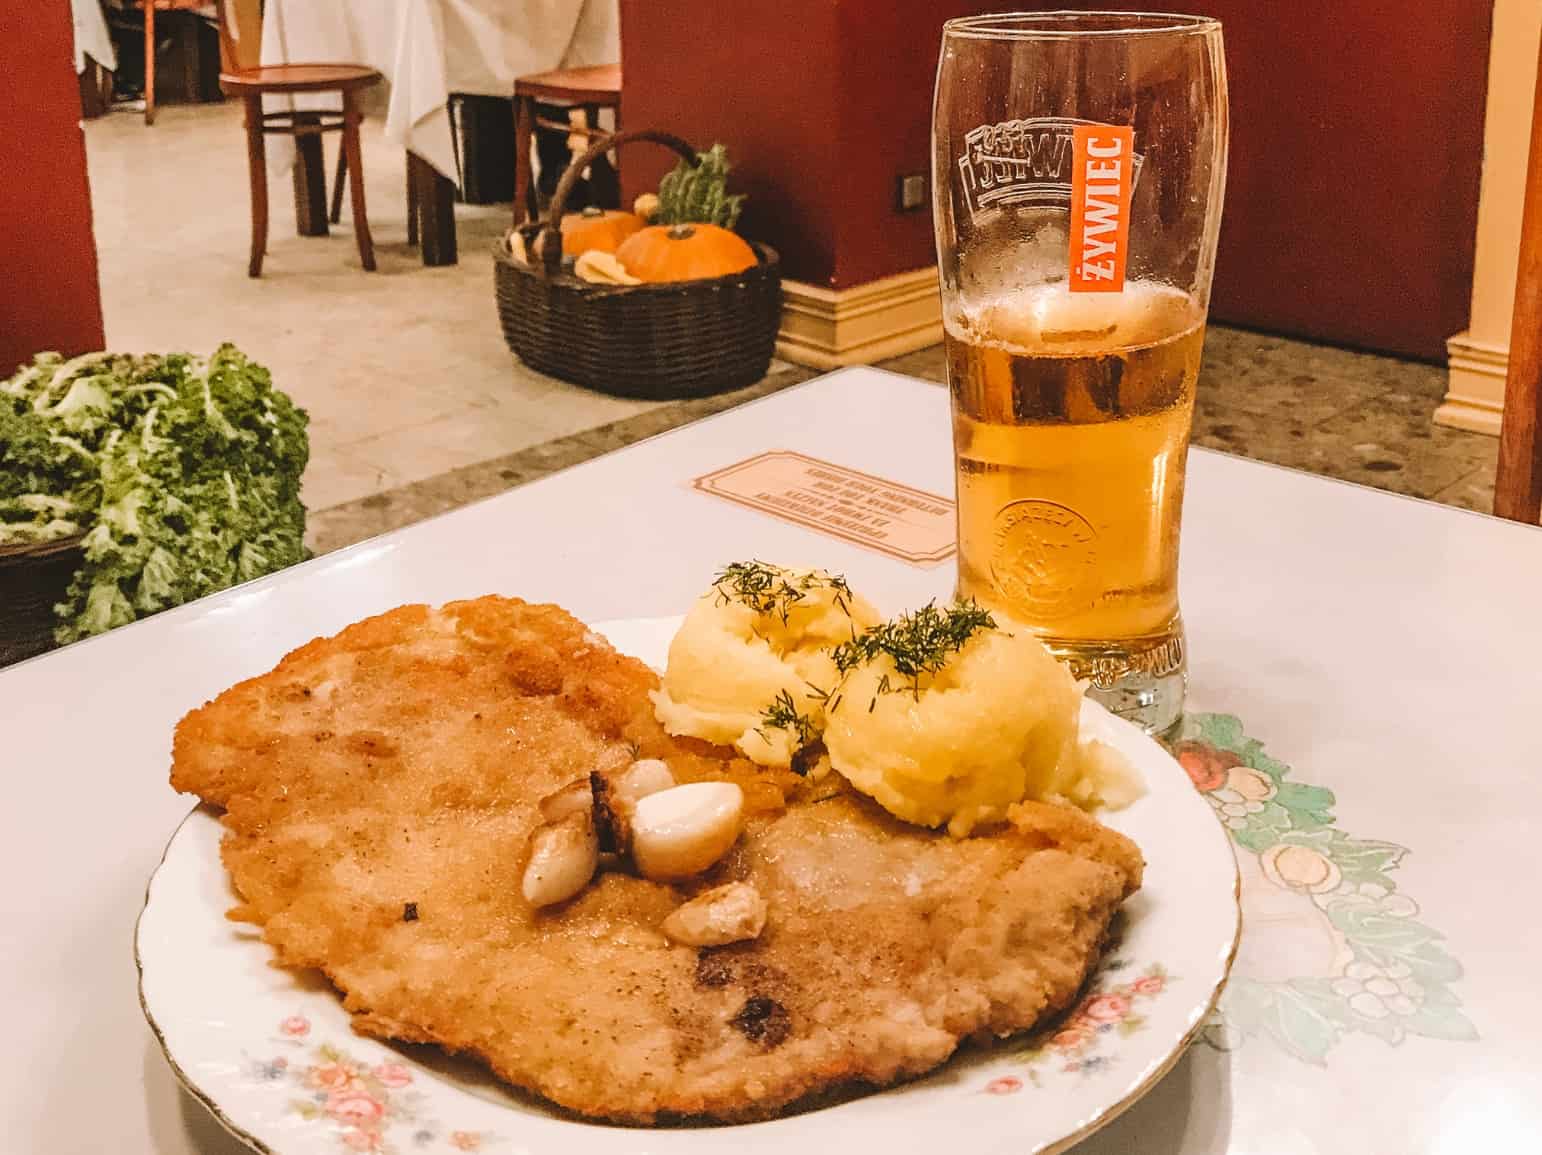 A huge piece of kotlet schabowy complete with two scoops of mashed potatoes is a delicious Krakow traditional food